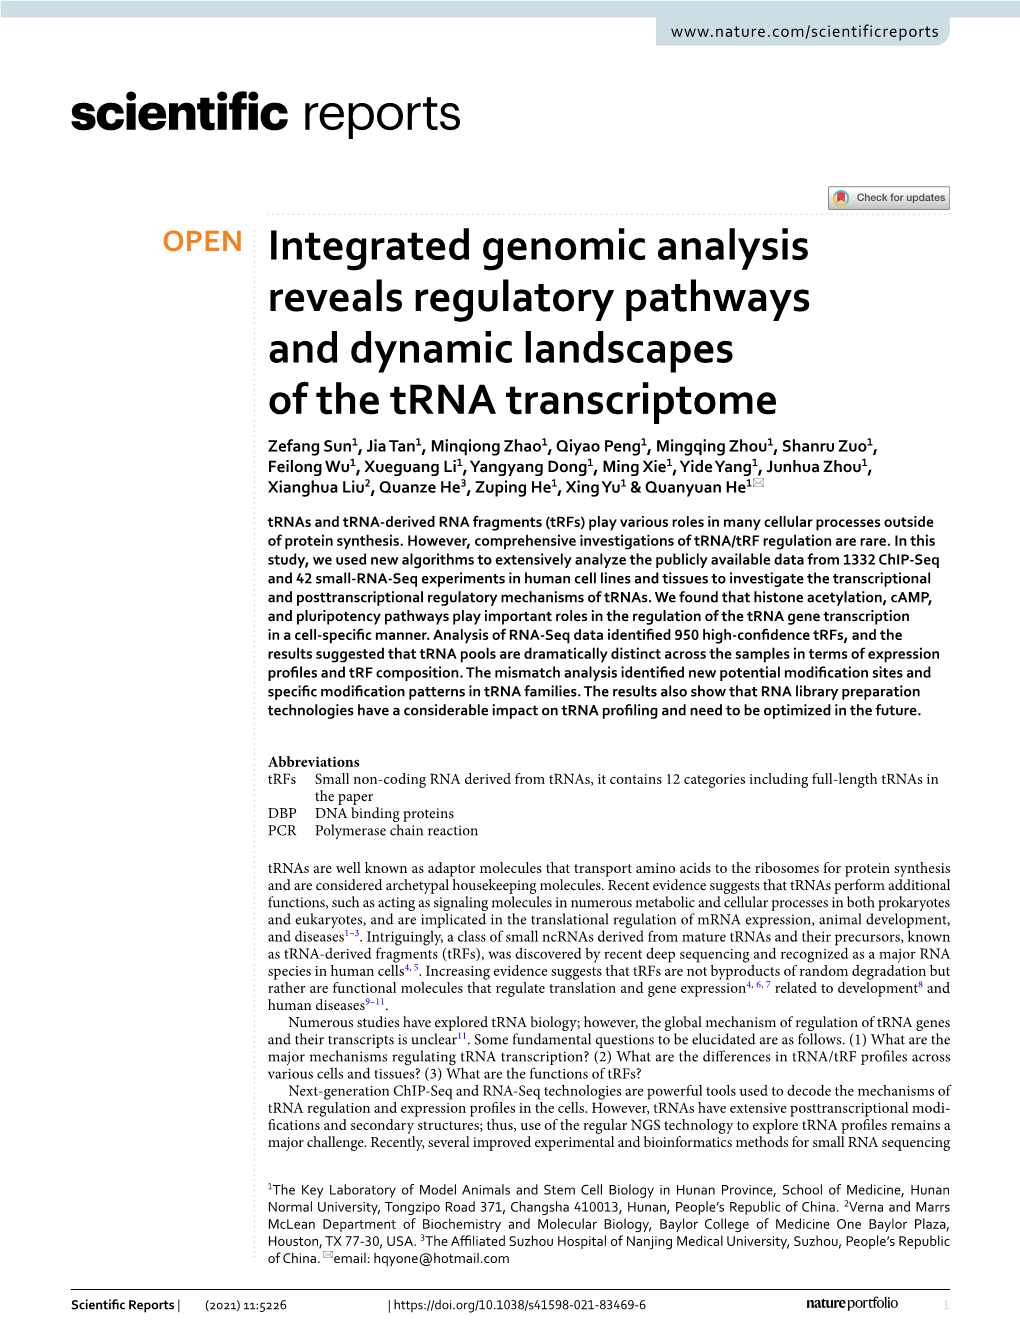 Integrated Genomic Analysis Reveals Regulatory Pathways and Dynamic Landscapes of the Trna Transcriptome